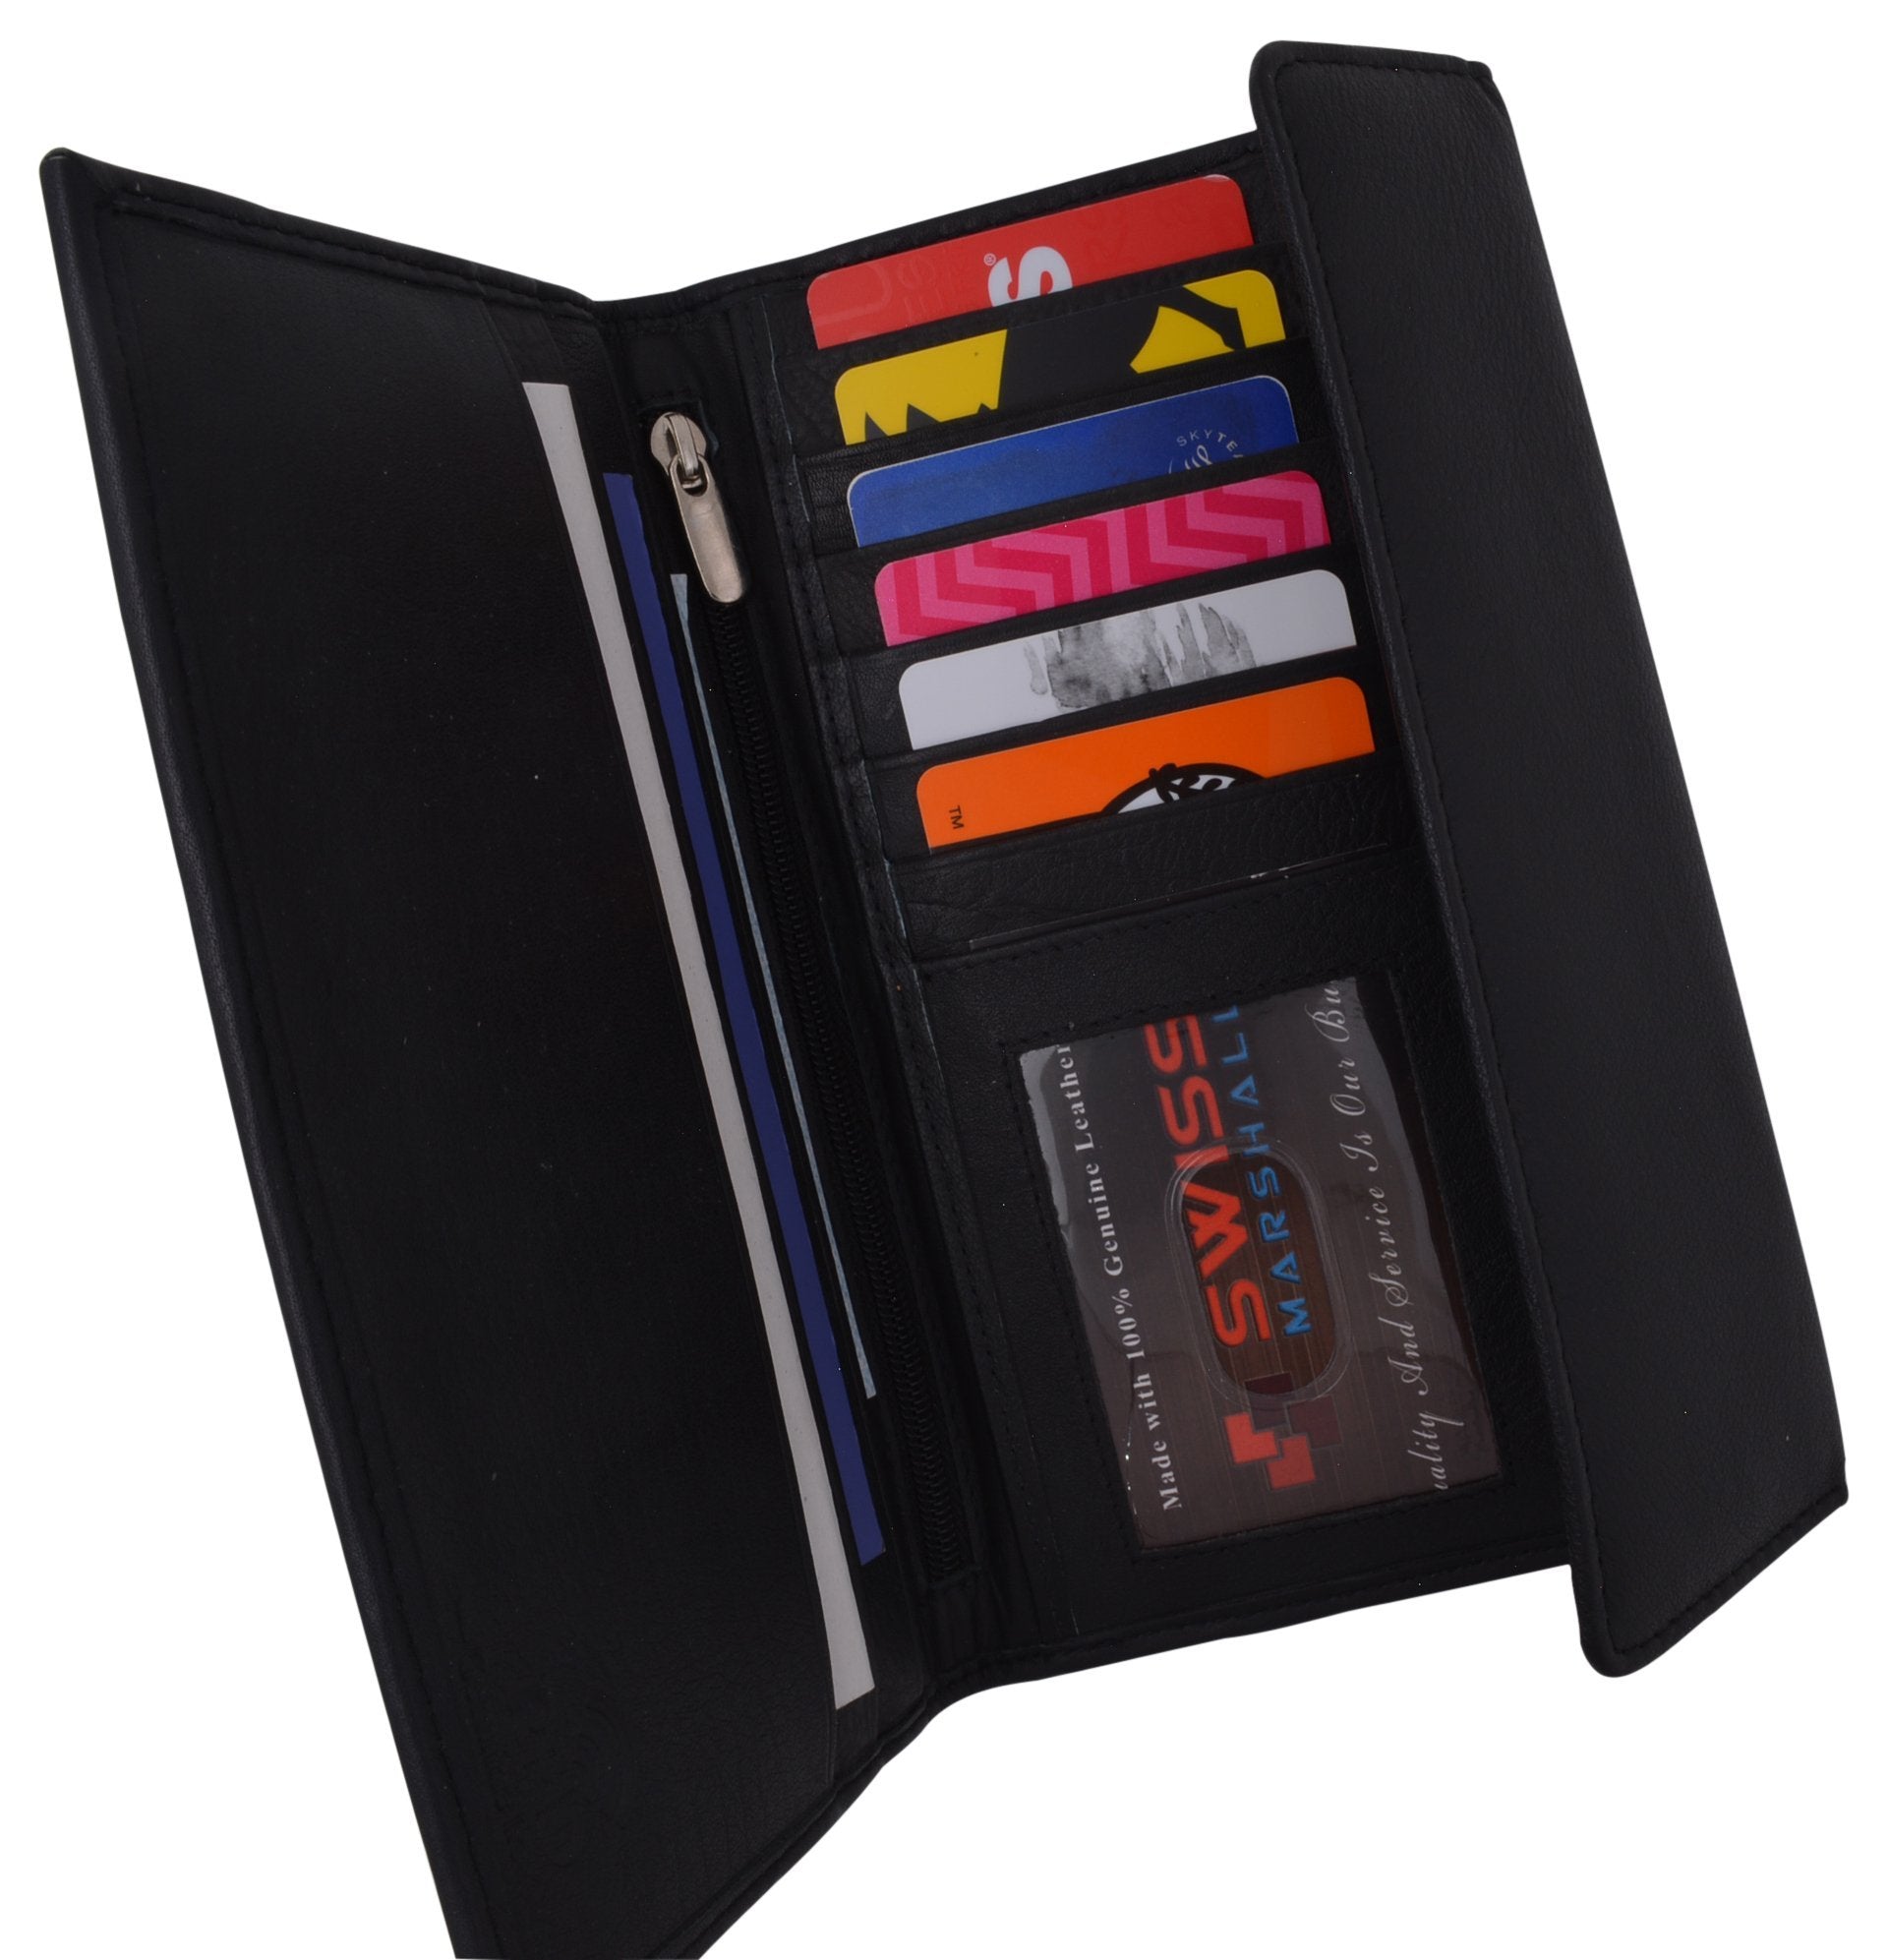 Signature X-Large  RFID Blocking Wallet – Clutch by B